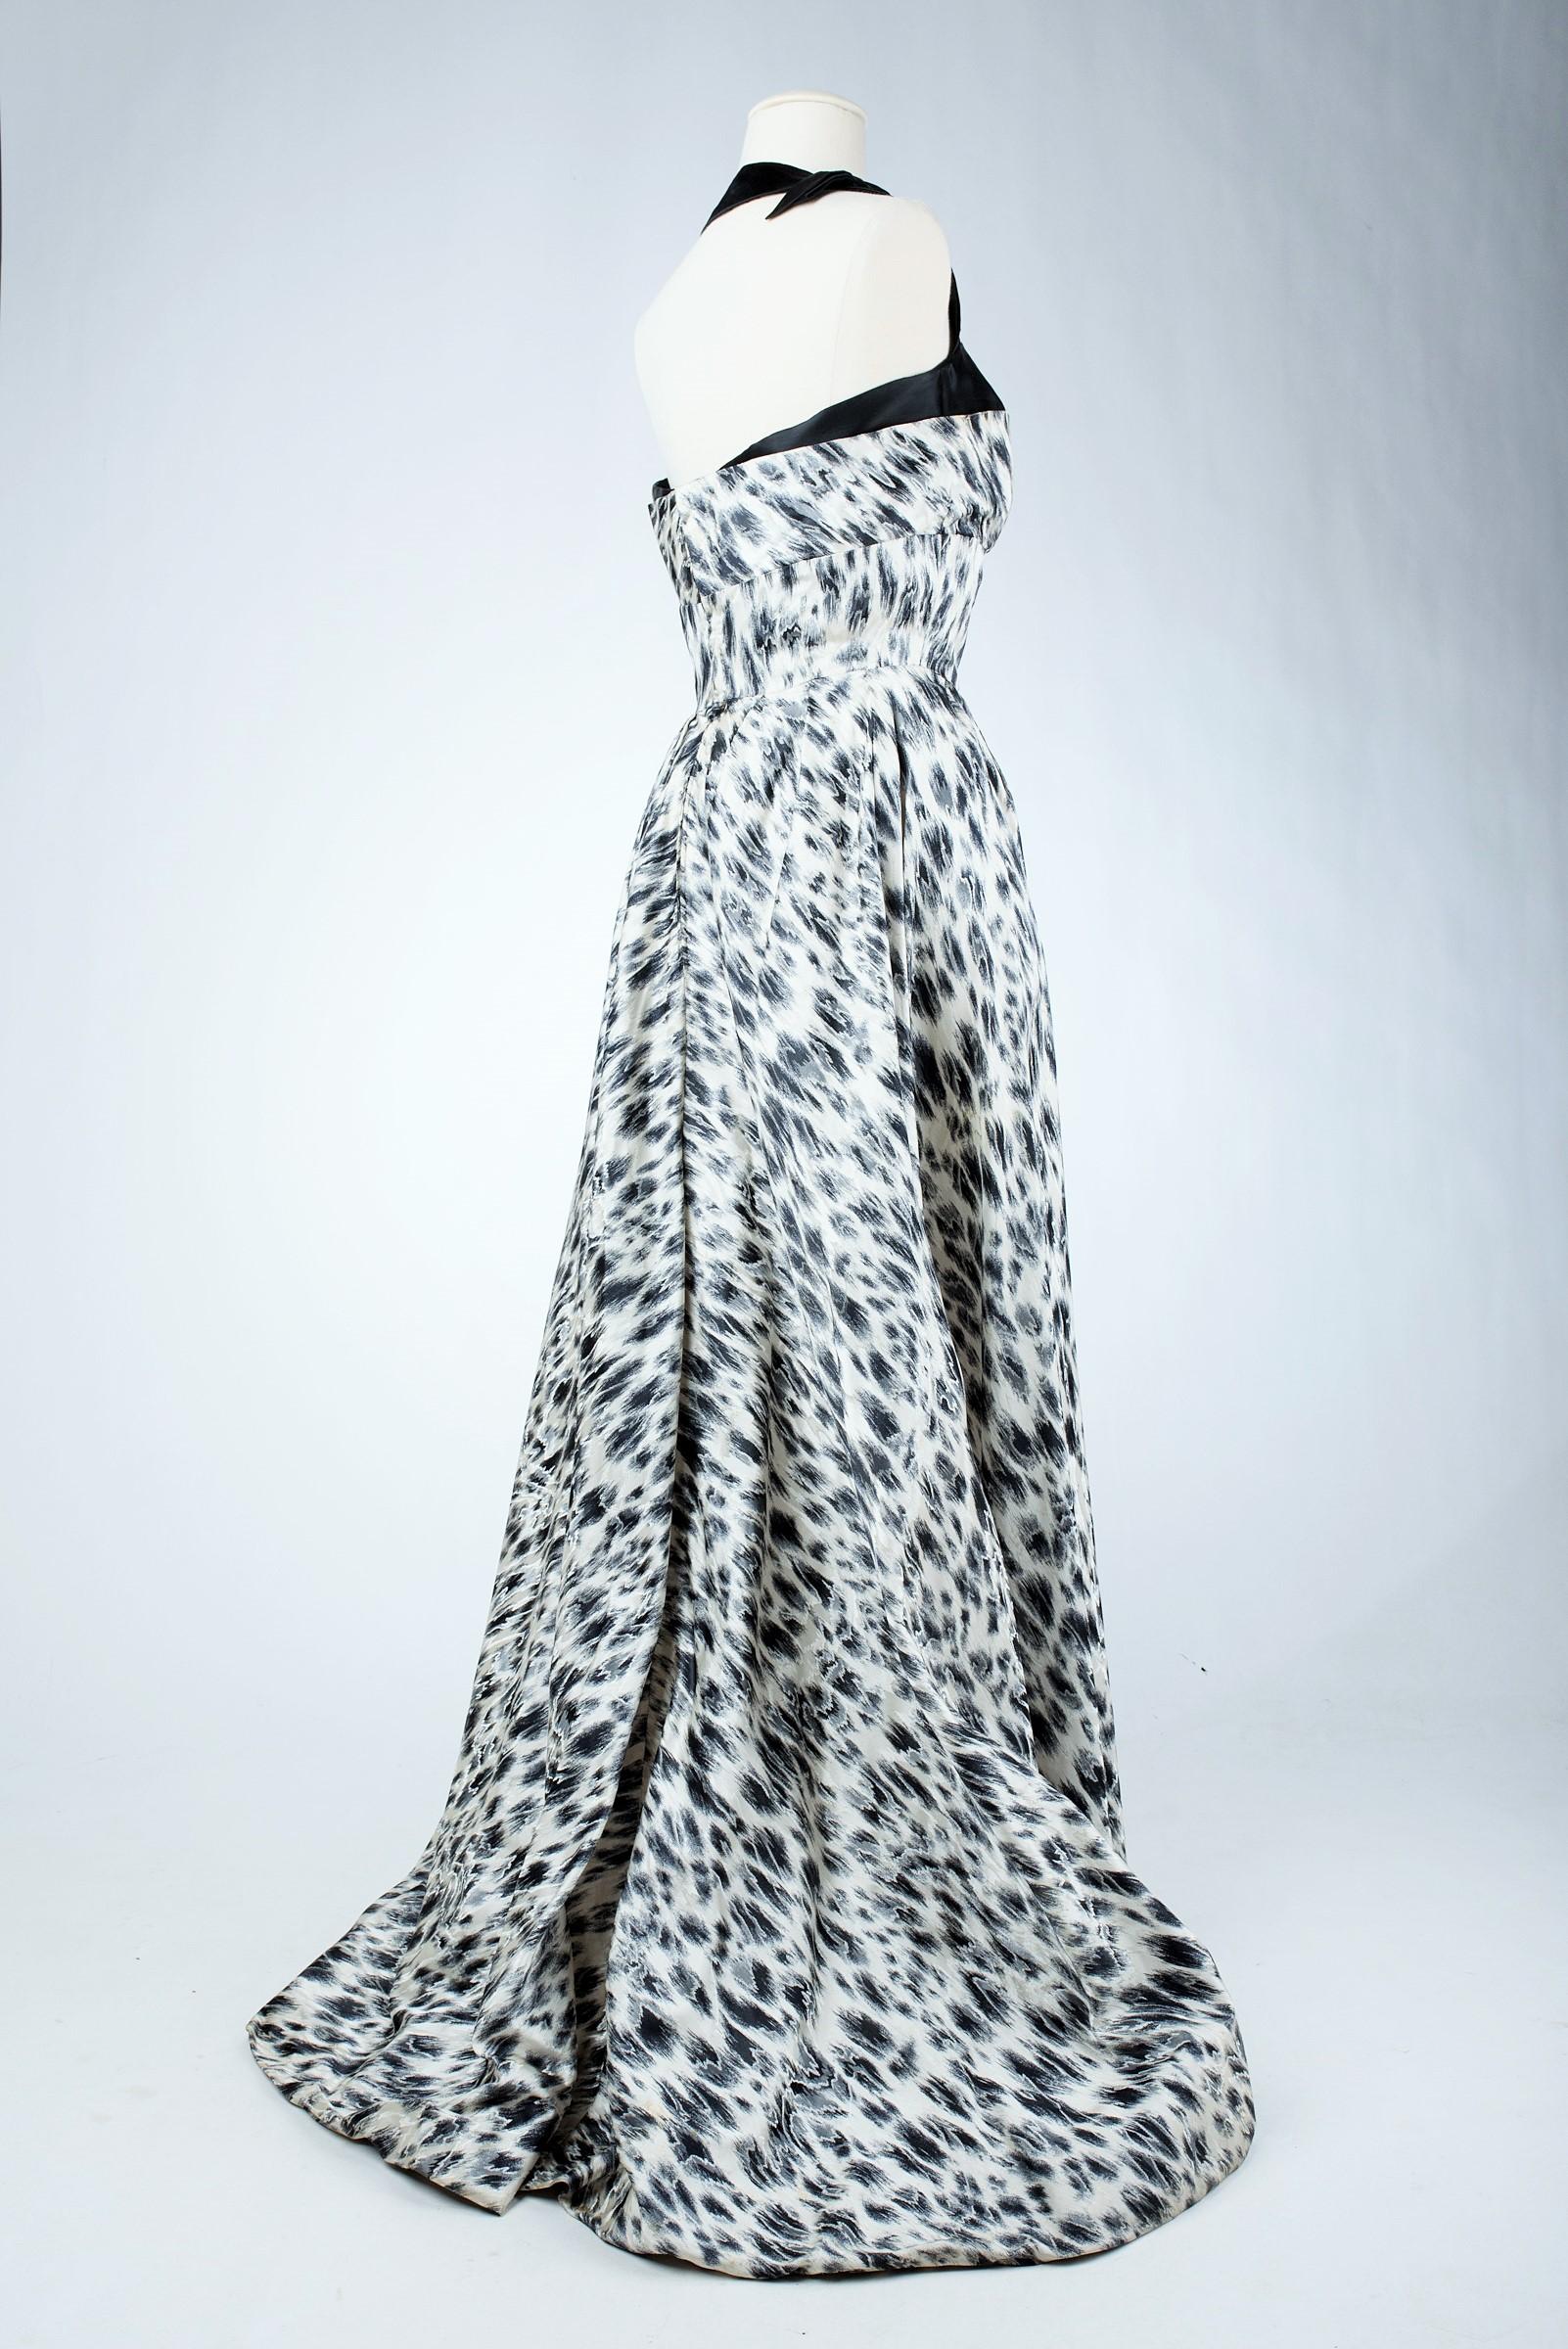 Leopard printed silk Evening Dress by Jacques Fath Haute Couture Circa 1955-1960 For Sale 8